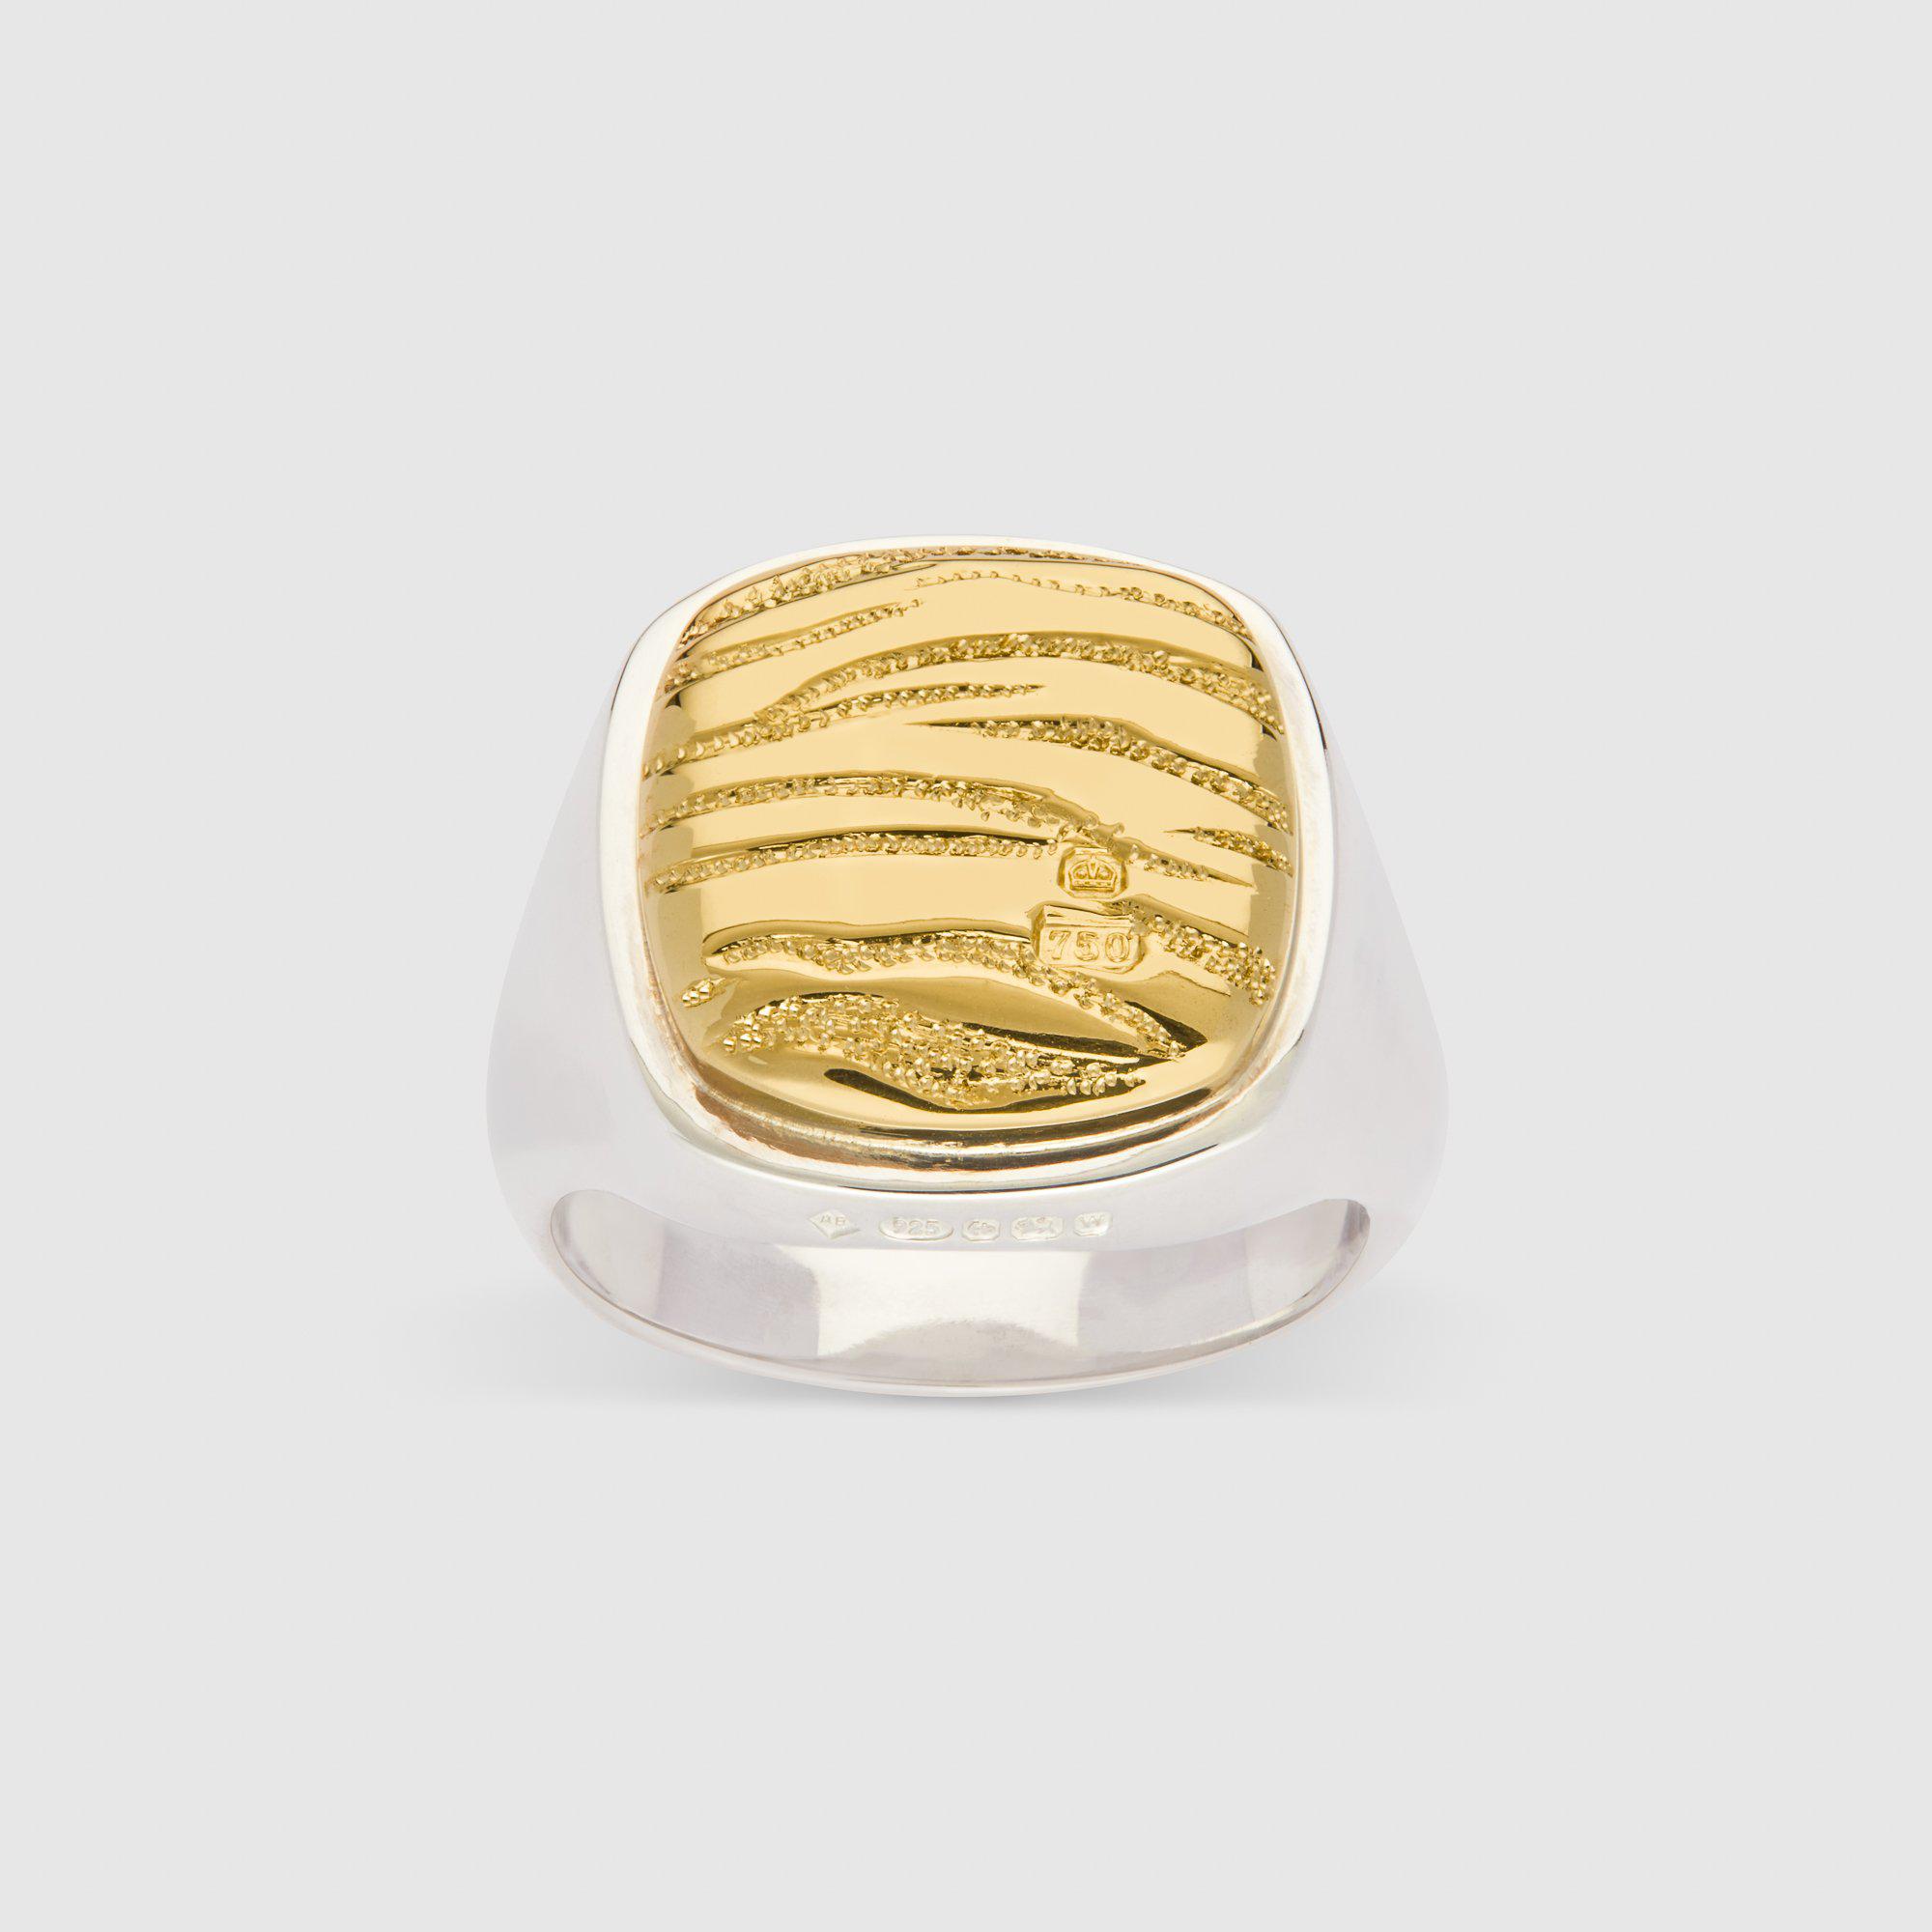 BUNNEY x DSM Exclusive Heavy Cushion Tiger Signet Ring by ANDREW BUNNEY